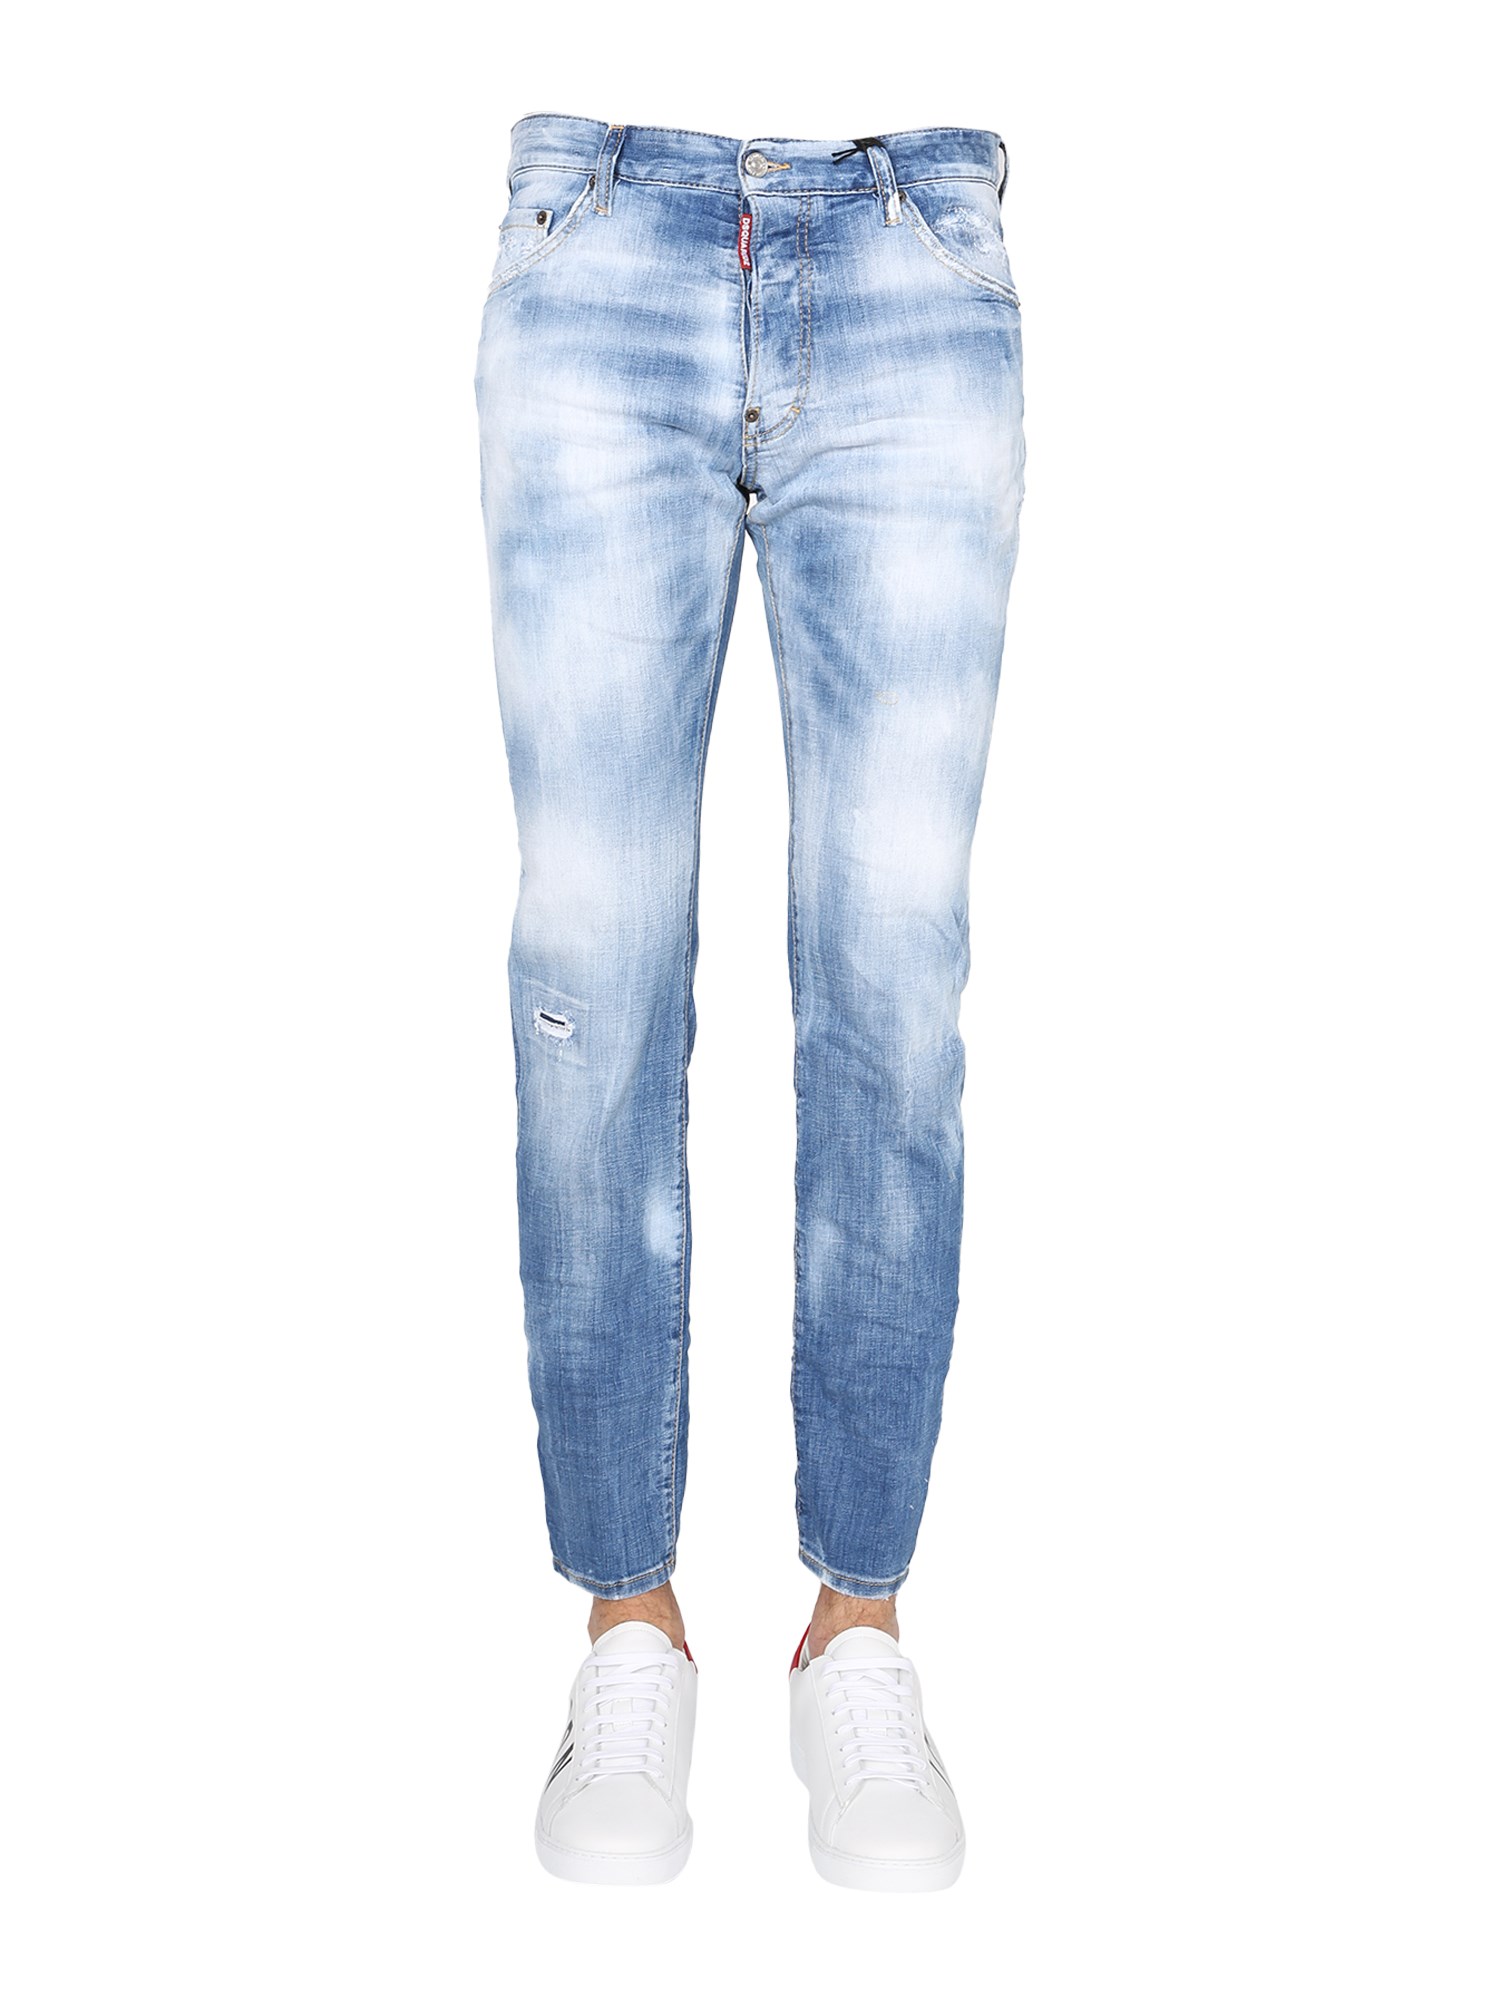 DSQUARED2 COOL GUY JEANS,202867